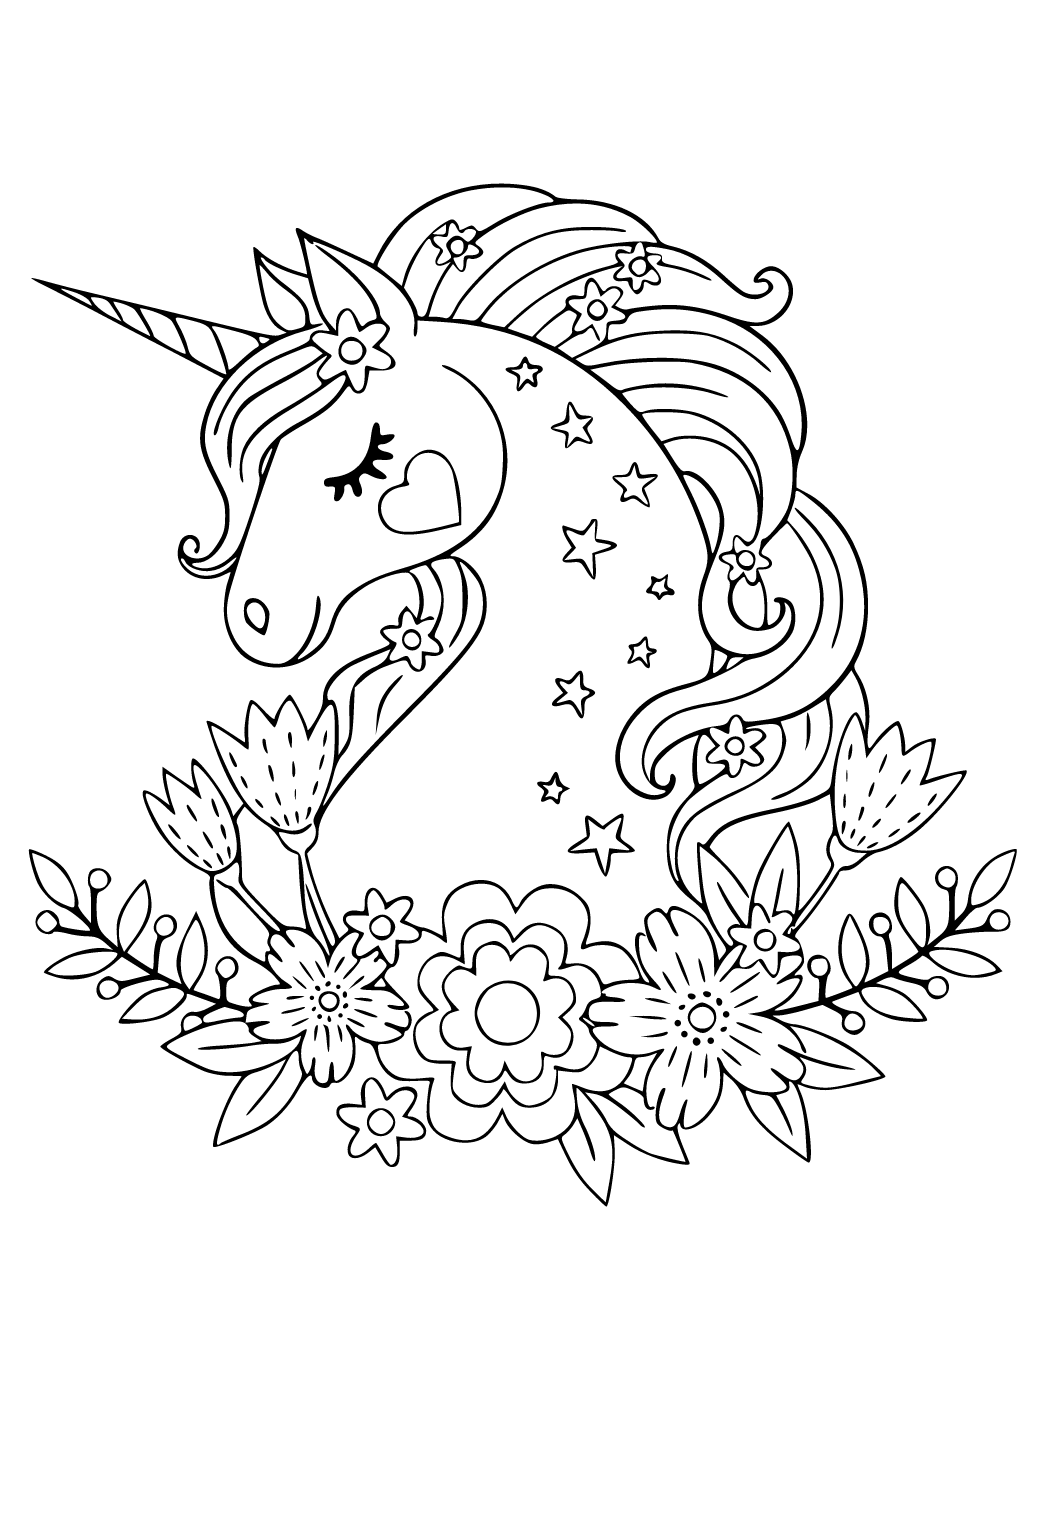 Free Printable Unicorn Makeup Coloring Page for Adults and Kids ...